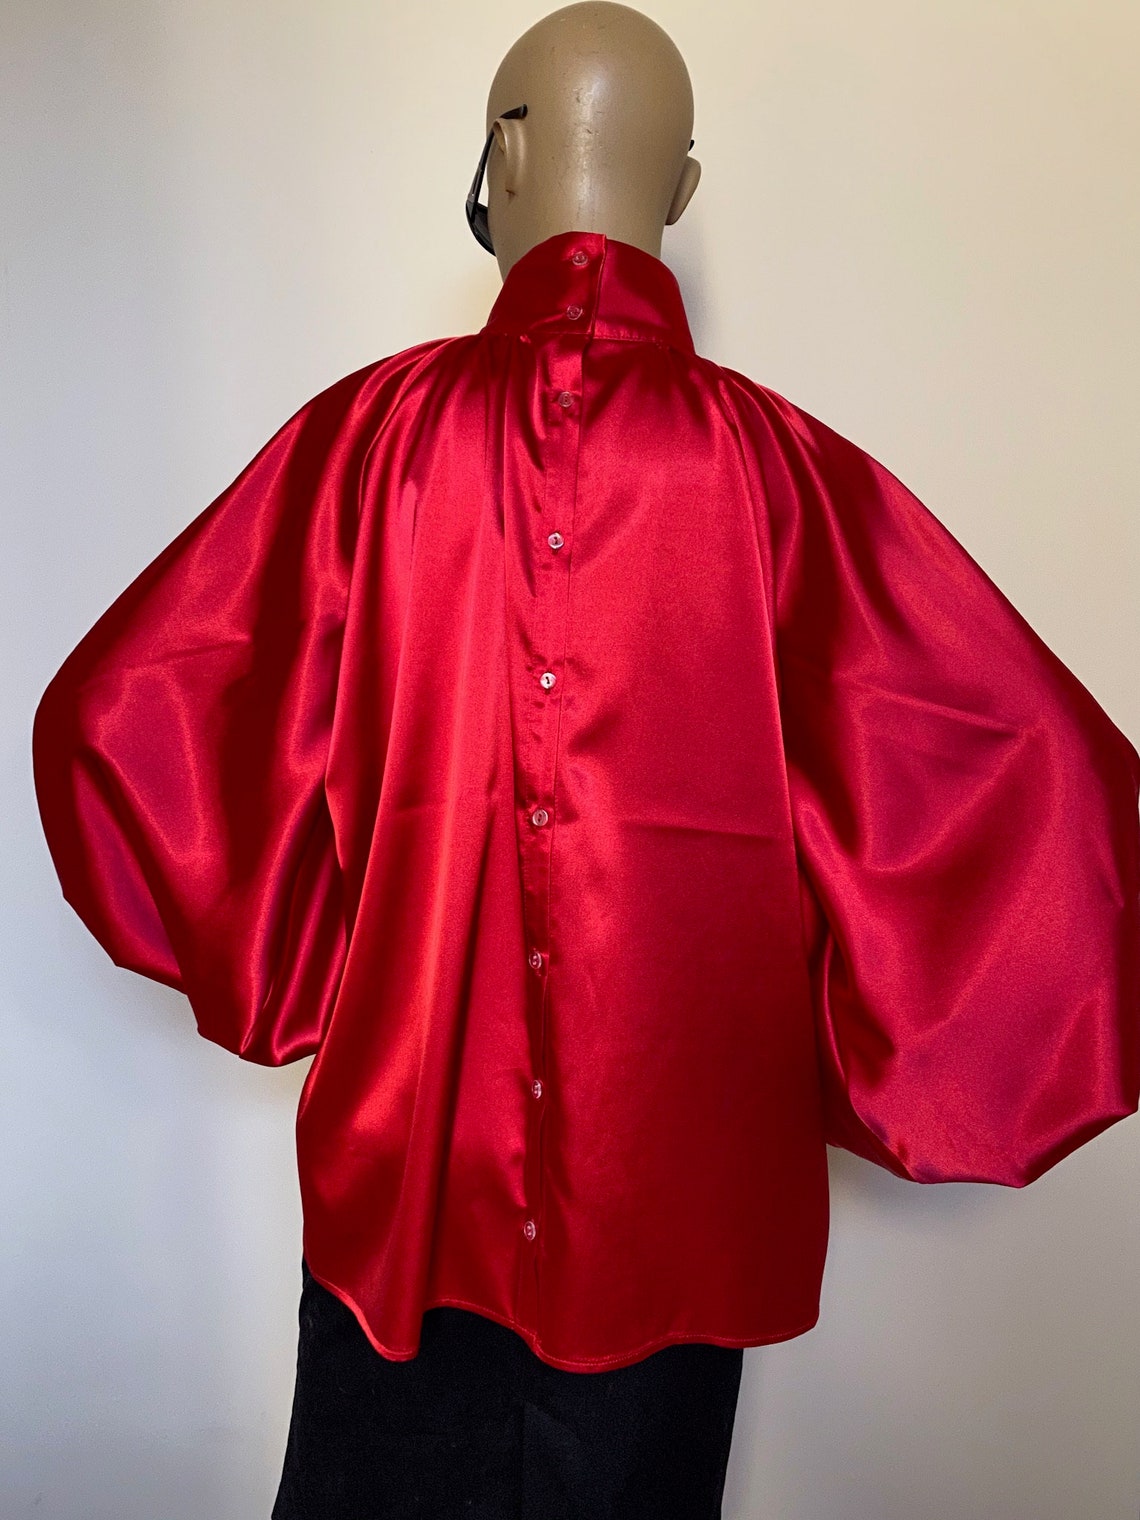 Red Formal satin cocktail satin blouse Victorian collar | Etsy